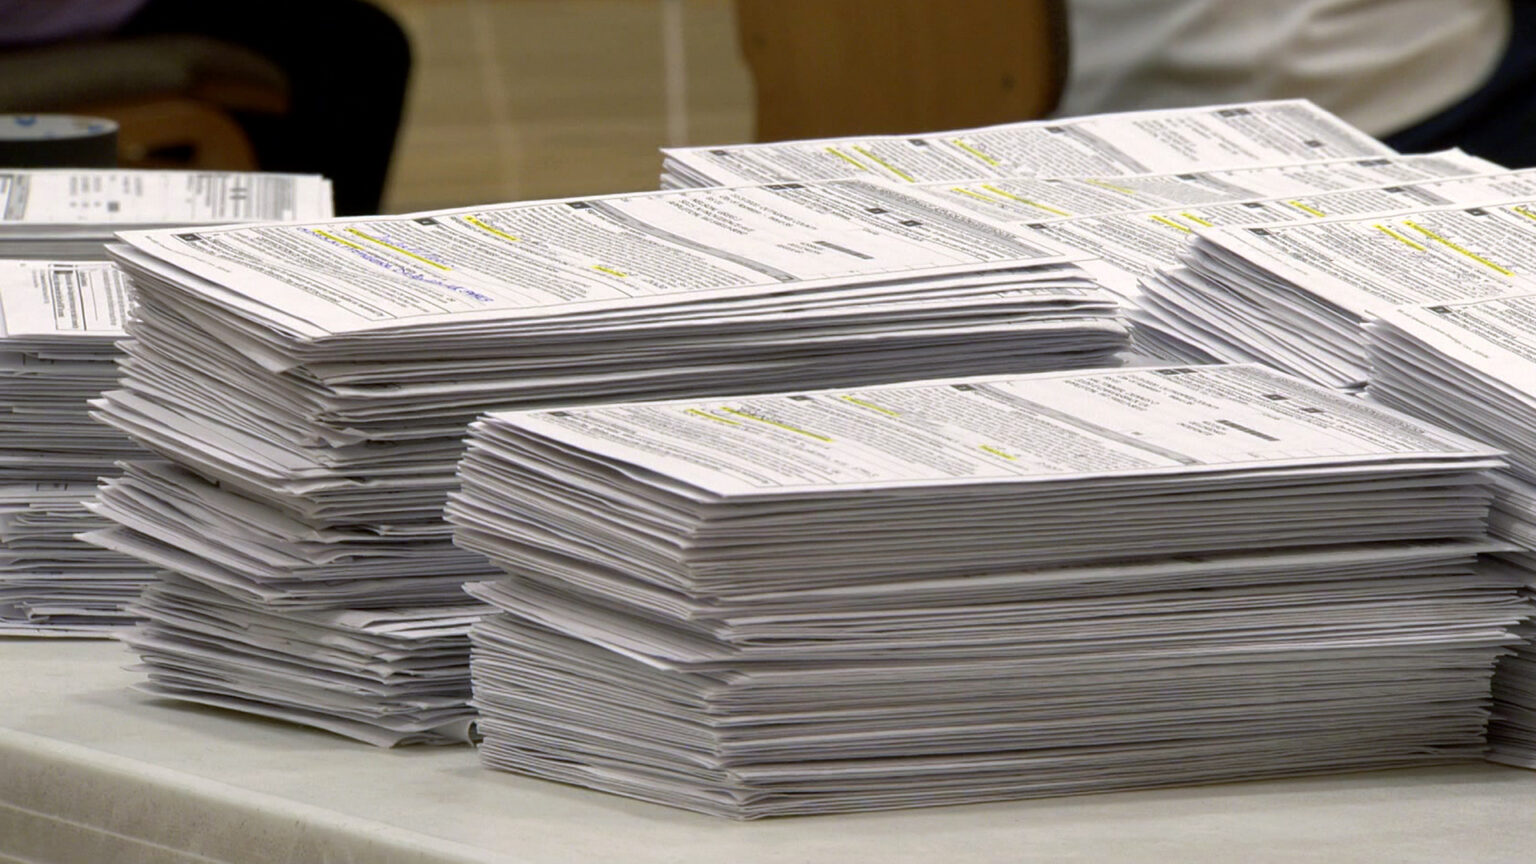 Multiple stacks of absente ballots envelopes with highlighted signature lines sit on a table.